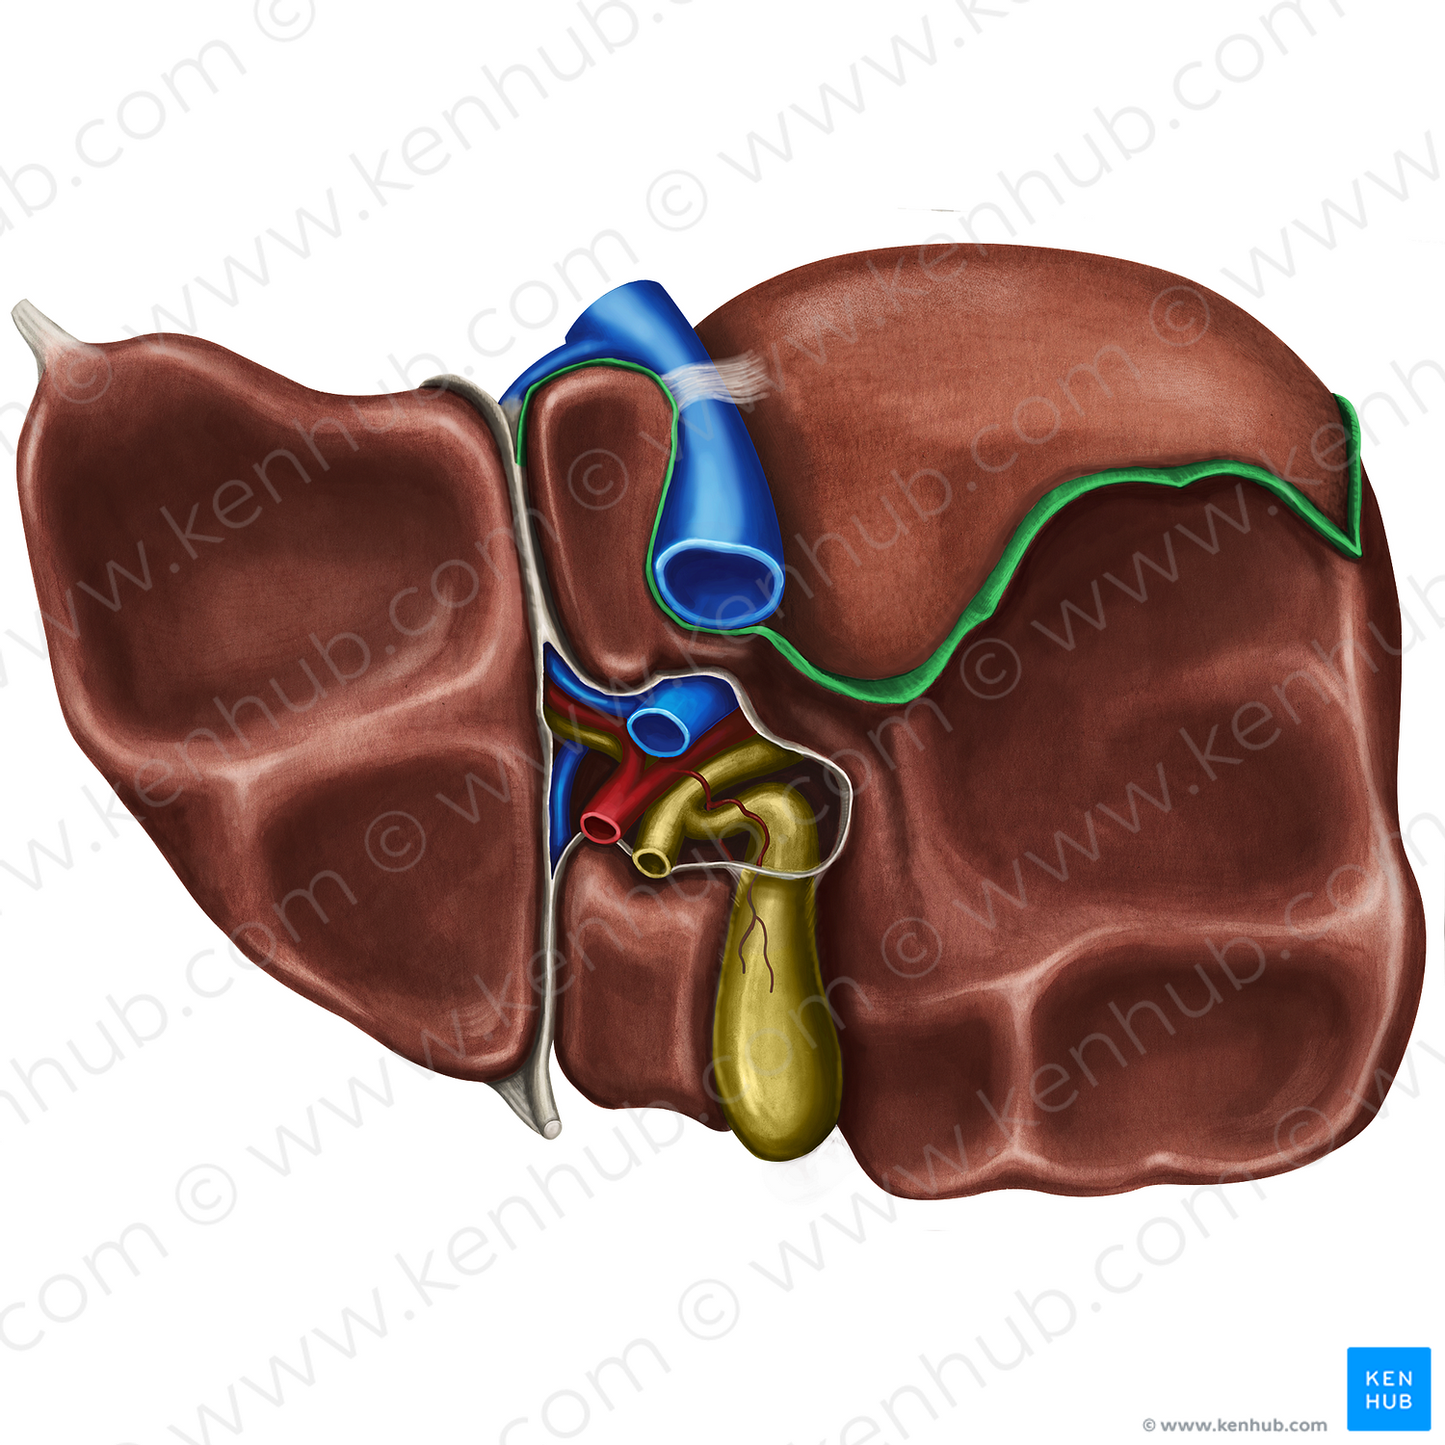 Posterior part of coronary ligament of liver (#4510)